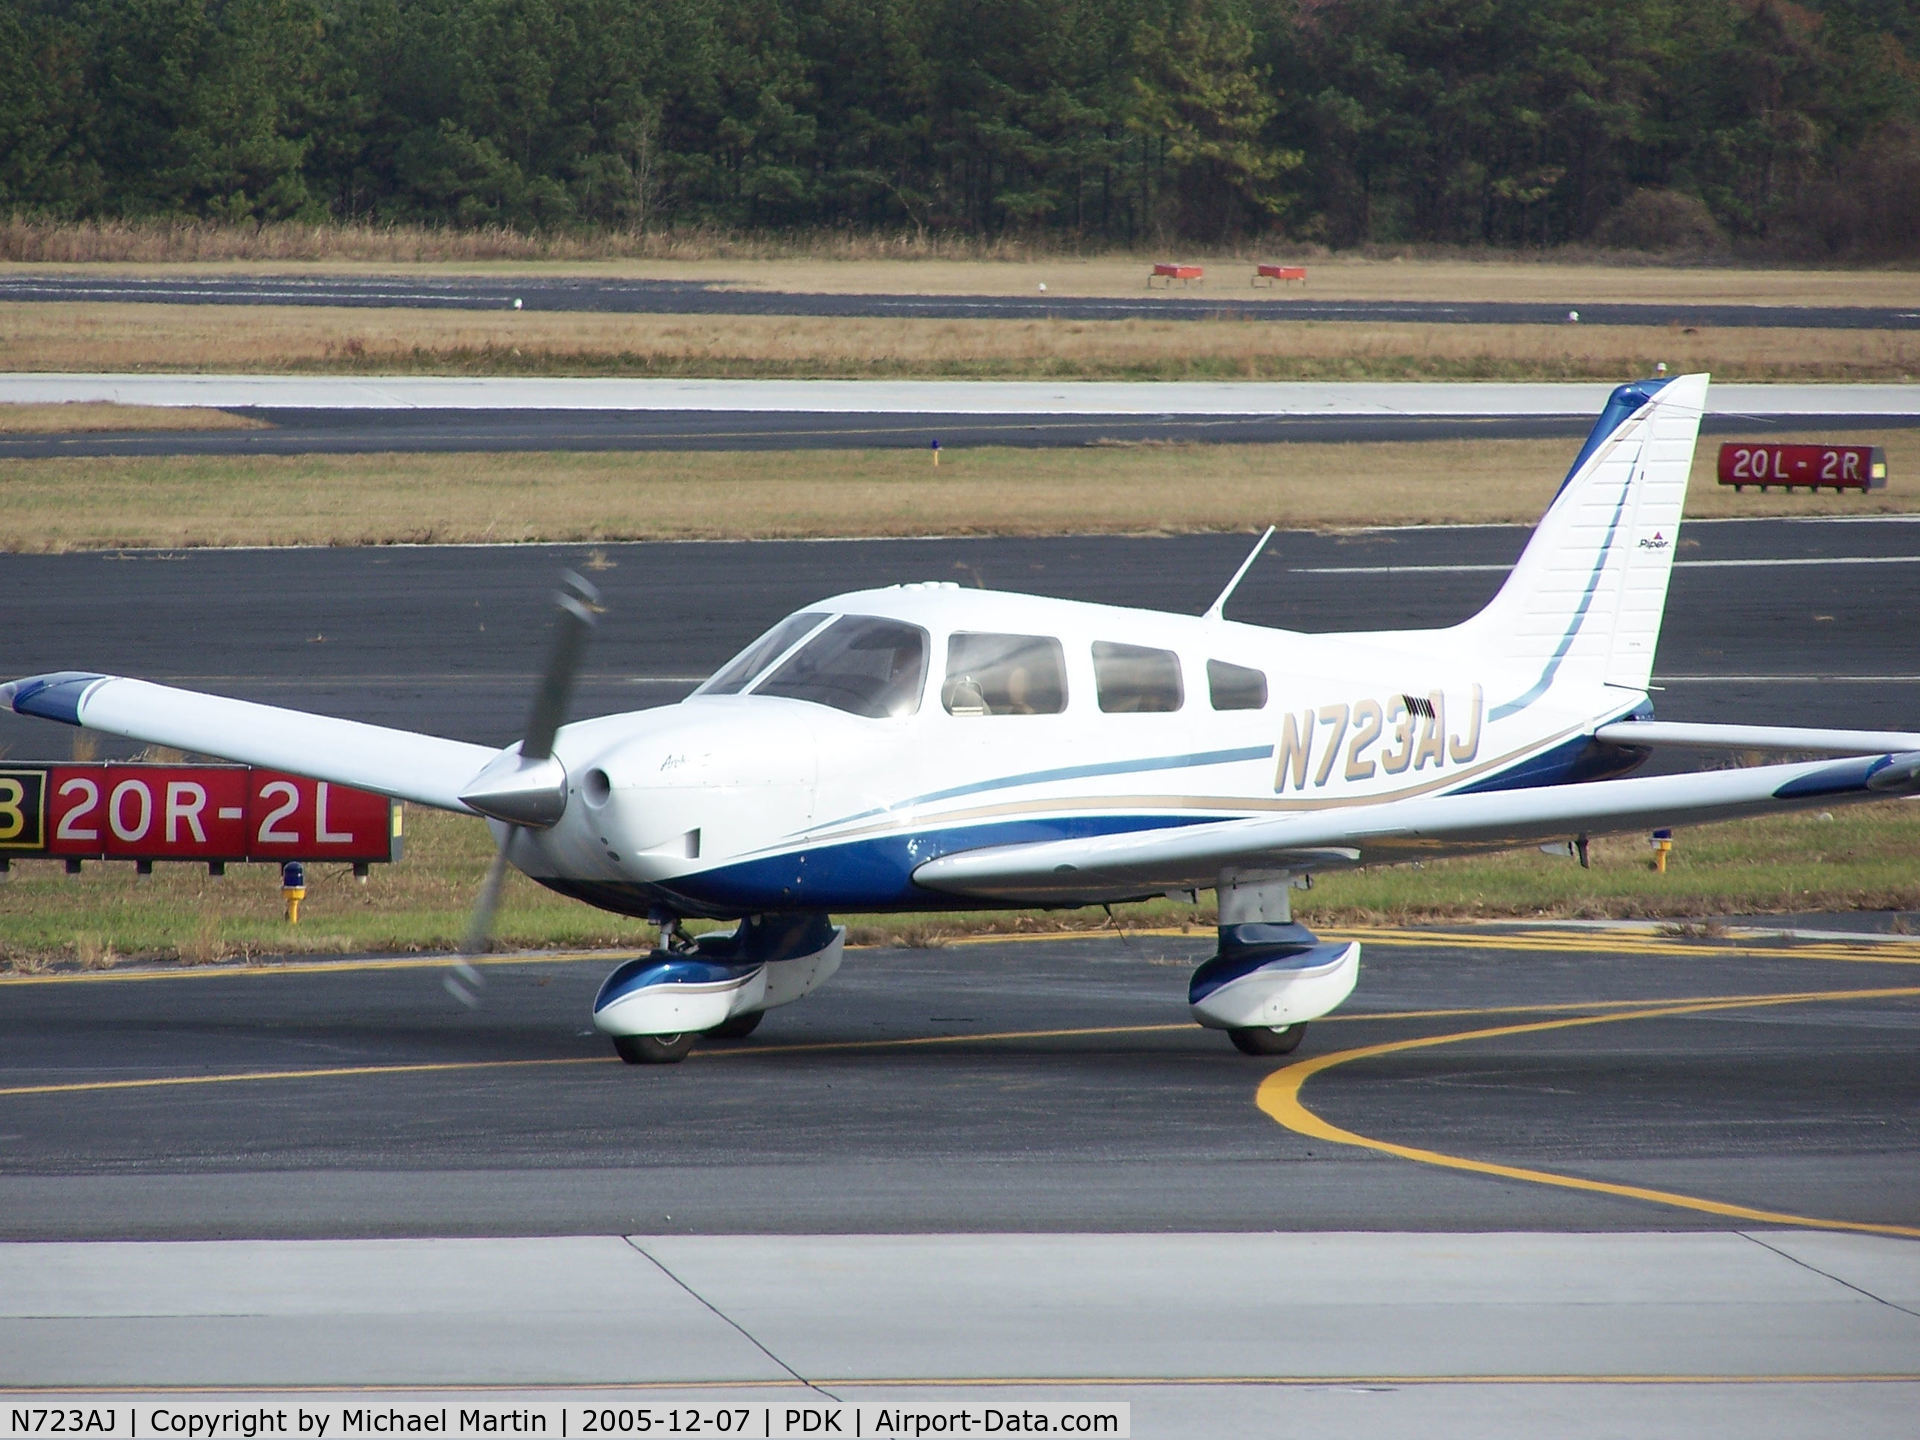 N723AJ, 2005 Piper PA-28-181 Archer III C/N 2843613, Taxing to Epps Air Service